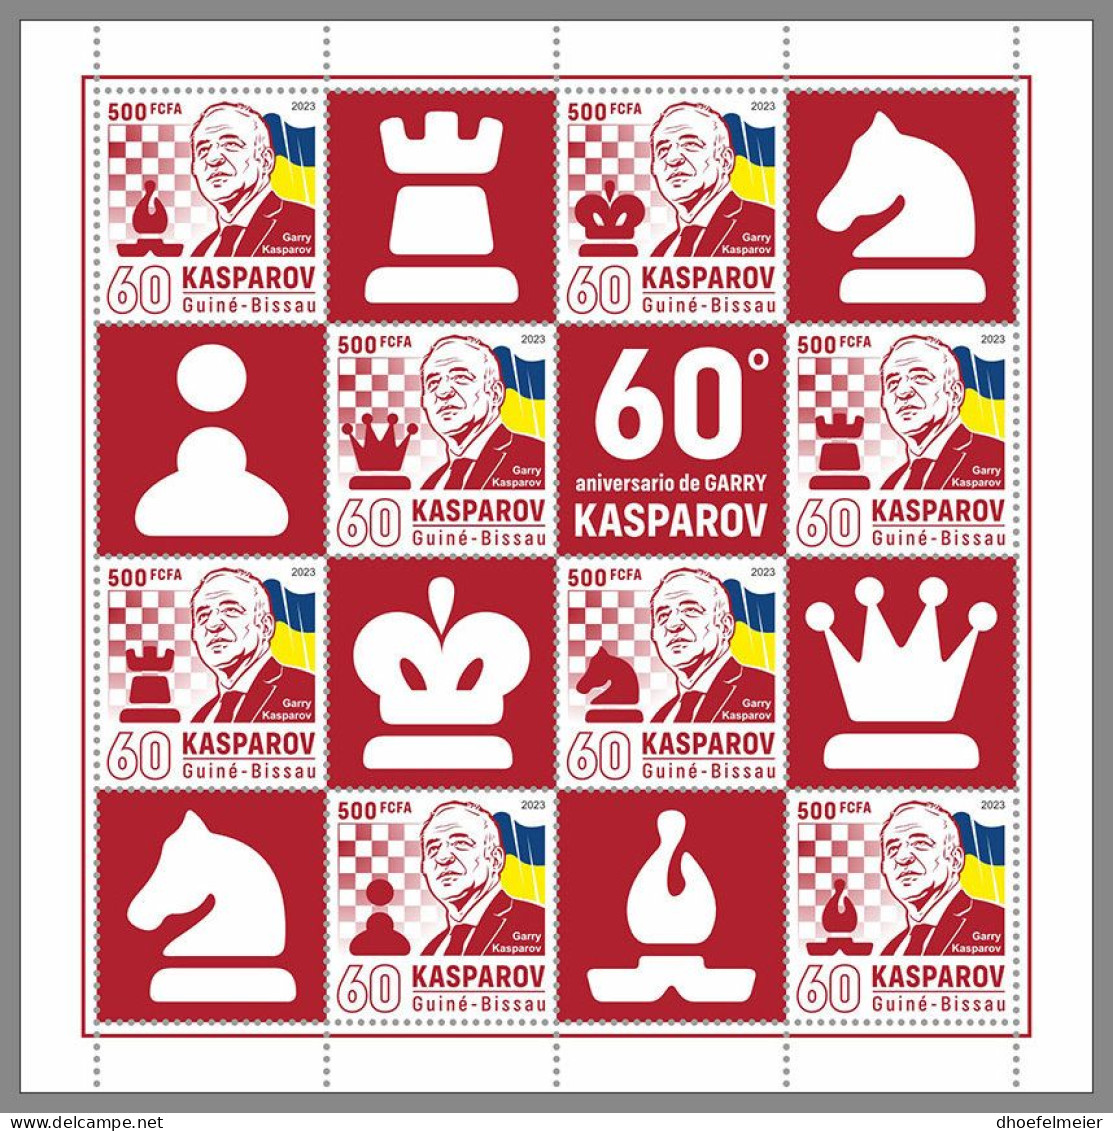 GUINEA REP.-BISSAU 2023 MNH Garry Kasparov Chess Schach M/S – OFFICIAL ISSUE – DHQ2419 - Chess